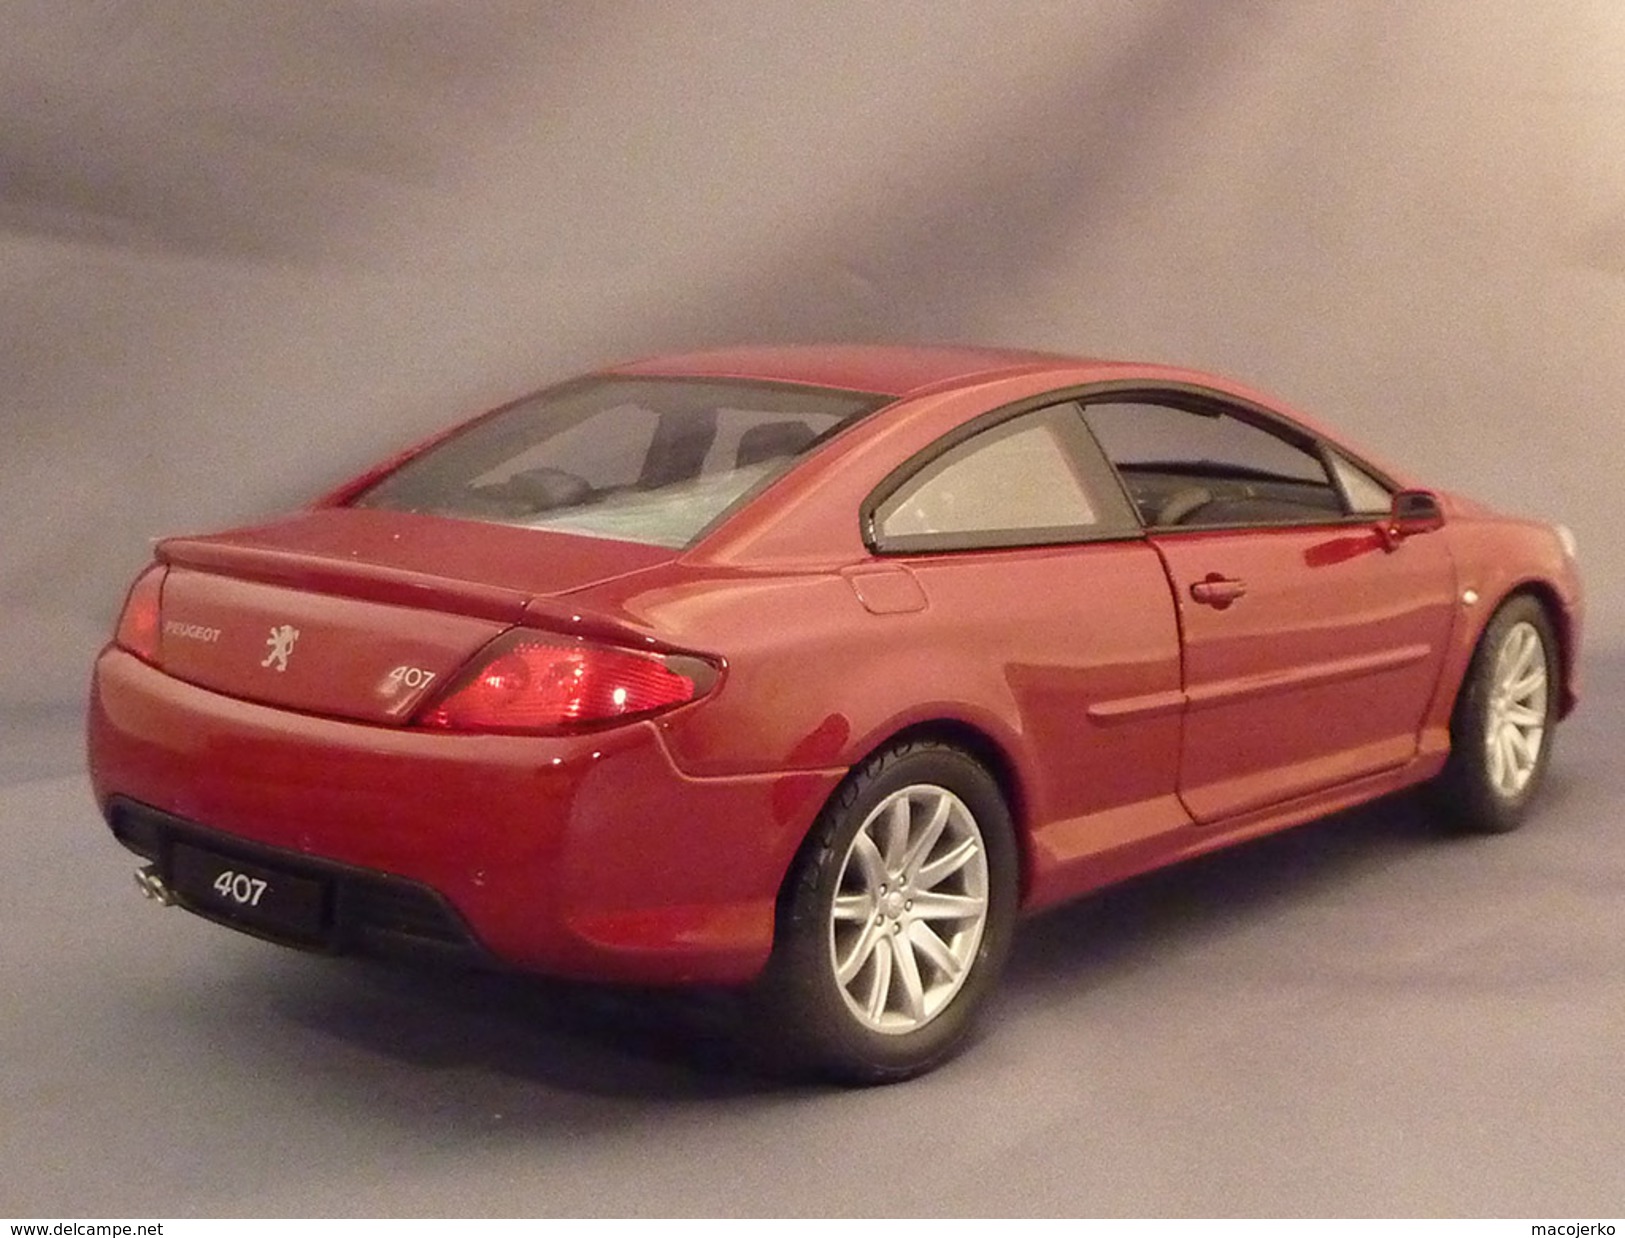 Welly 12562, Peugeot 407 Coupé, 1:18 - Welly